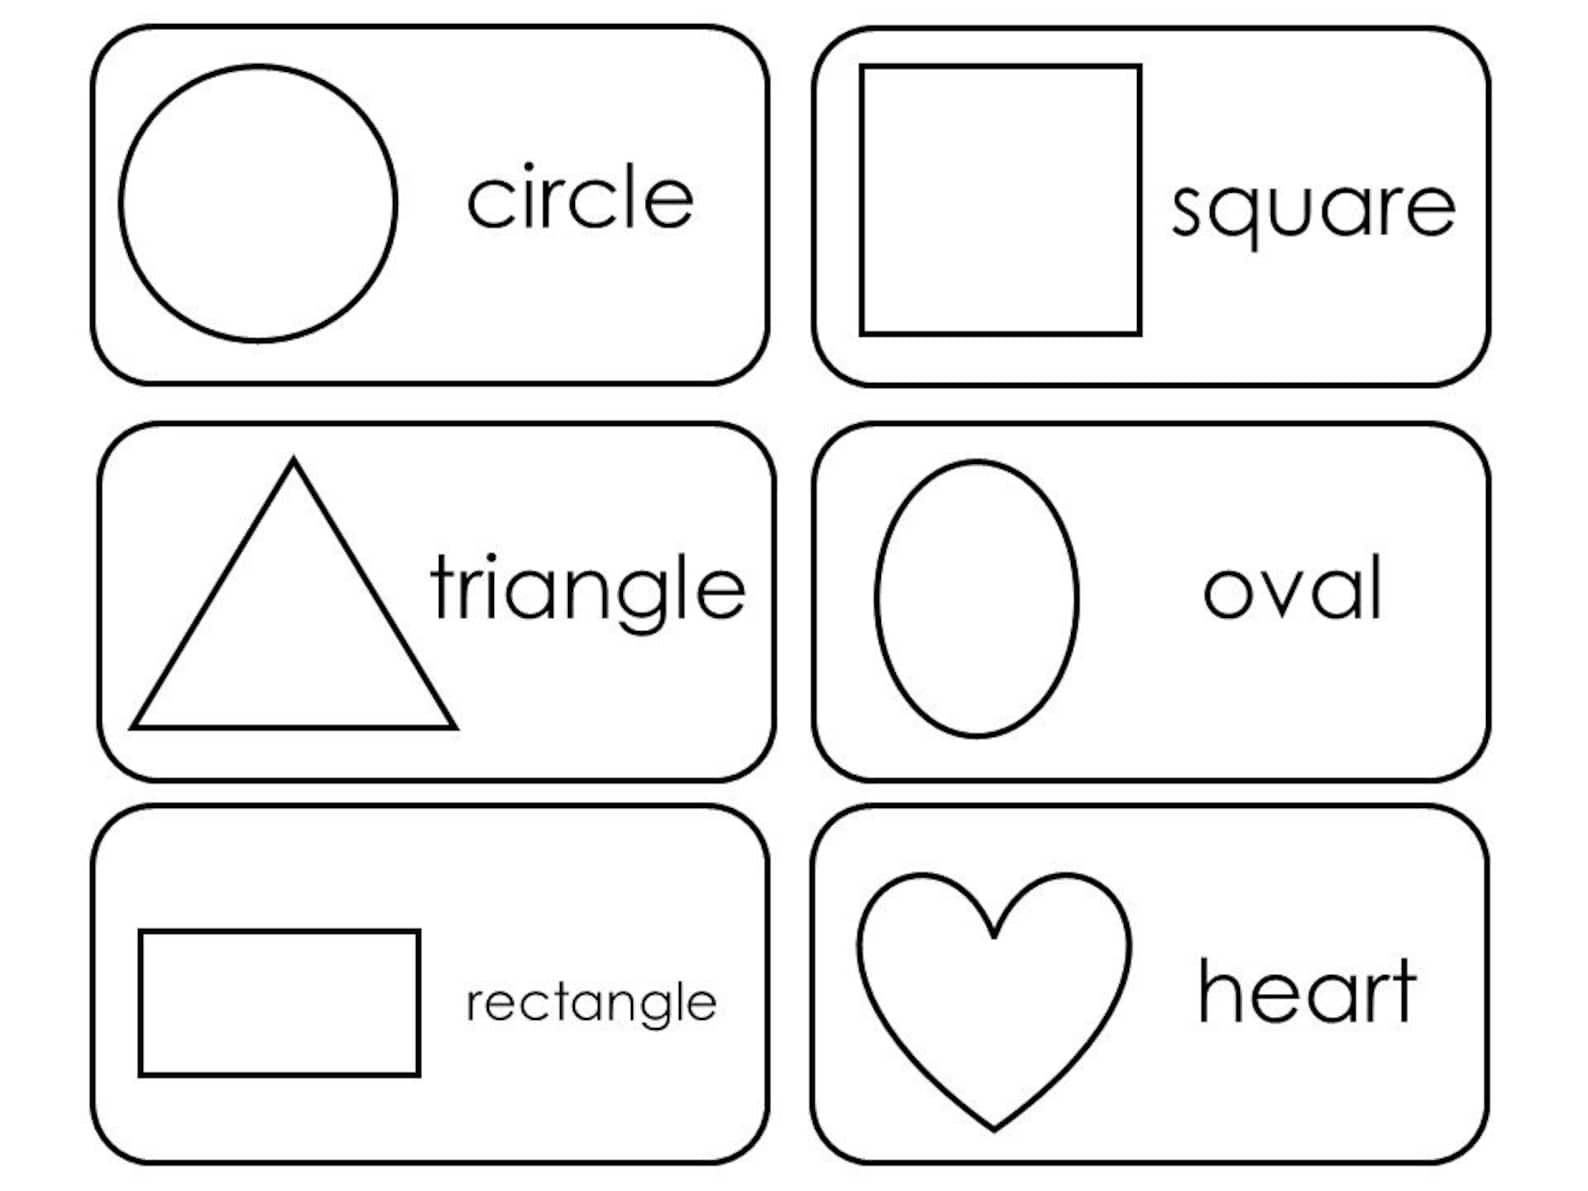 2d Shapes Flashcards